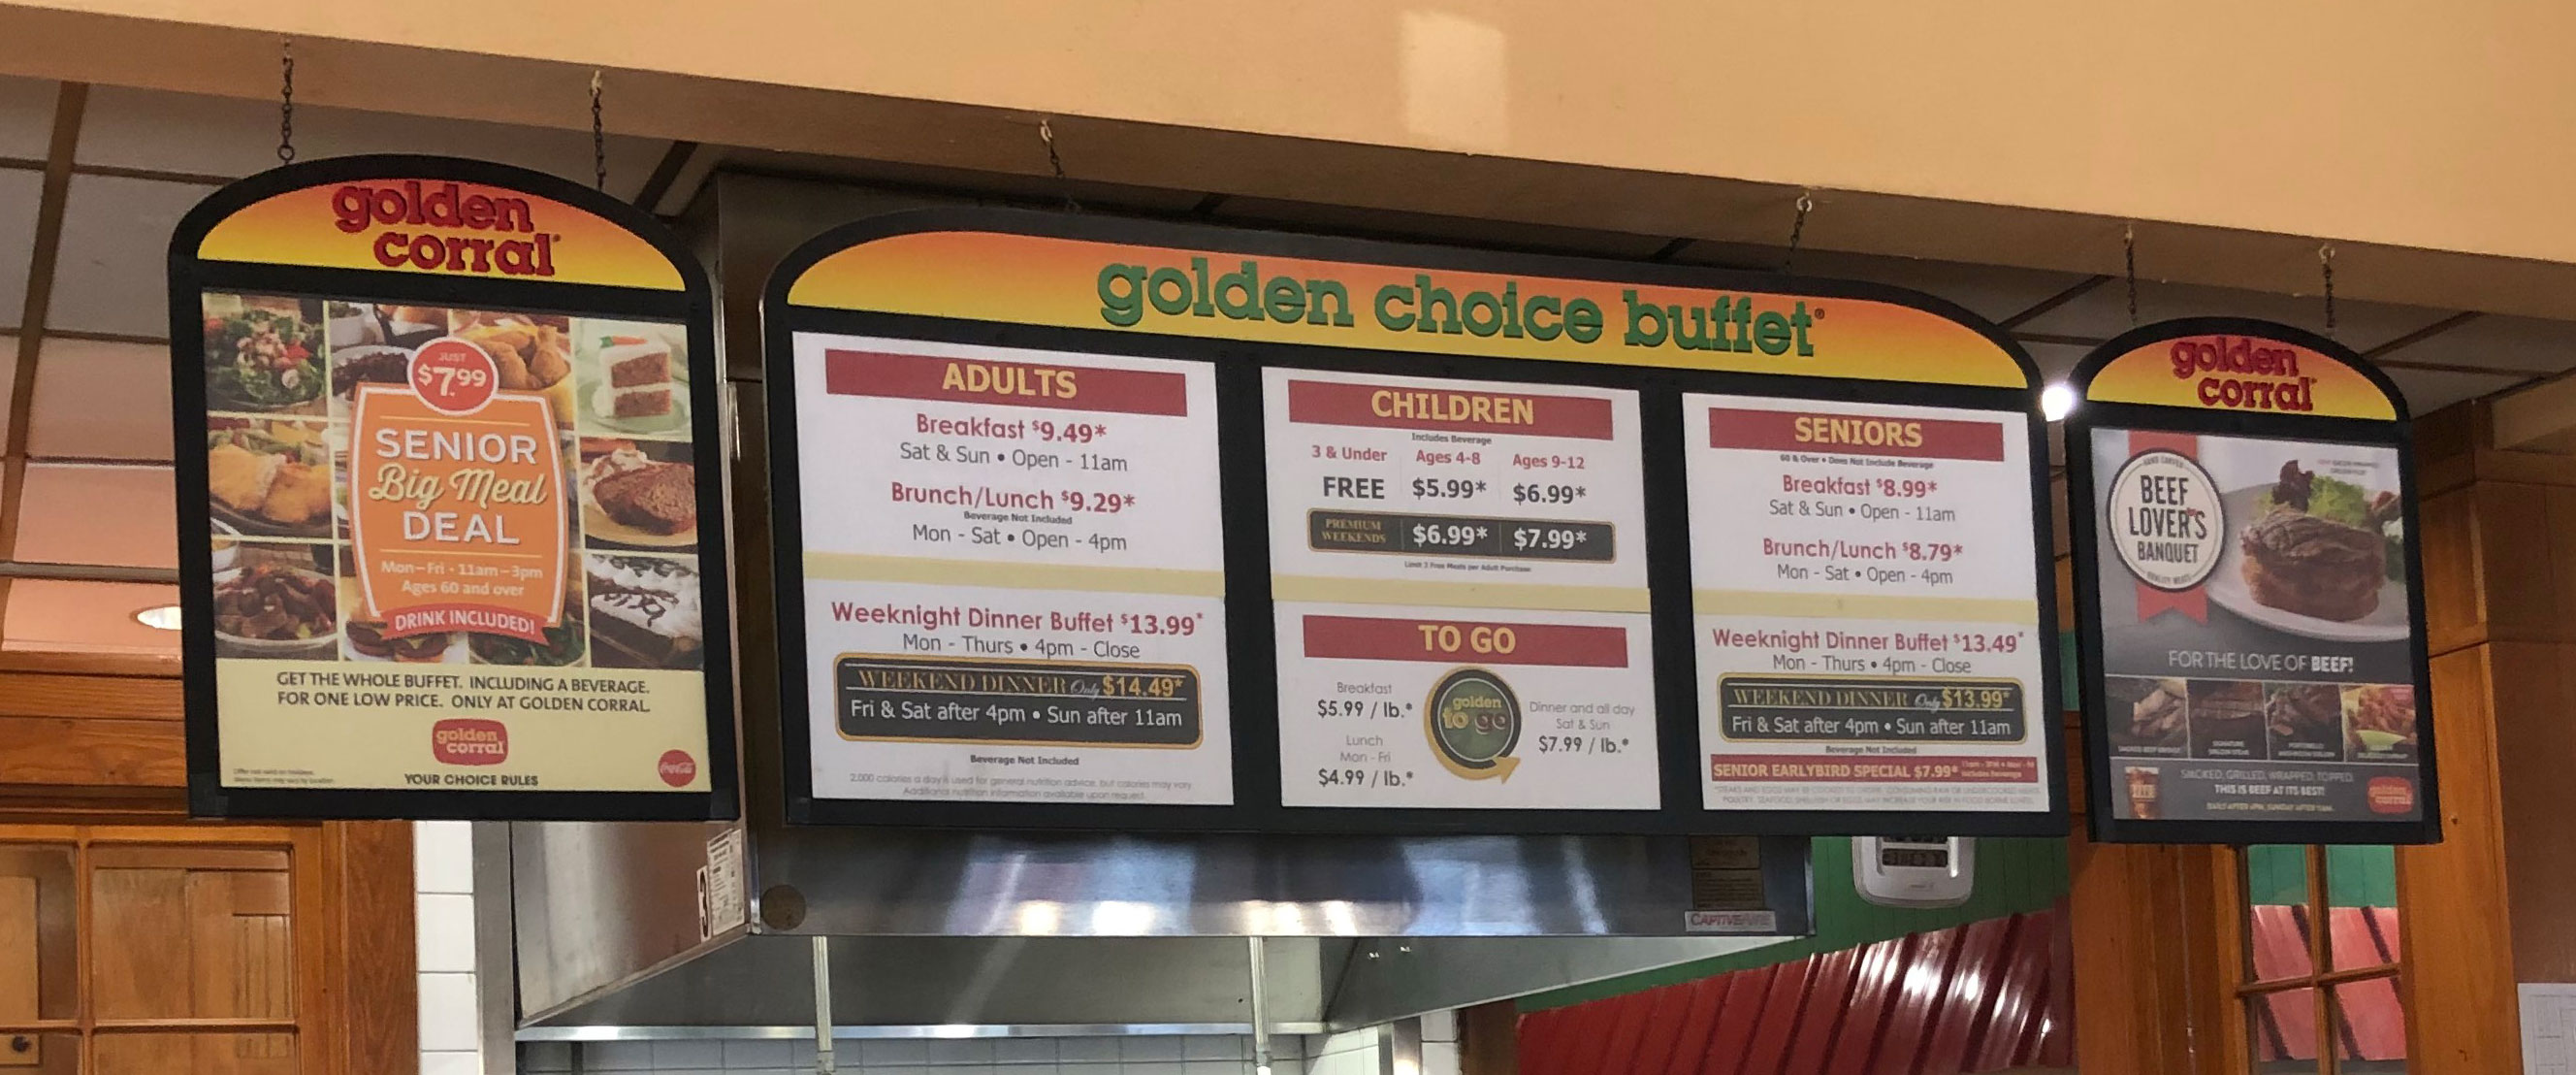 Golden Corral Prices? [Golden Corral Price List Guide for 2019]